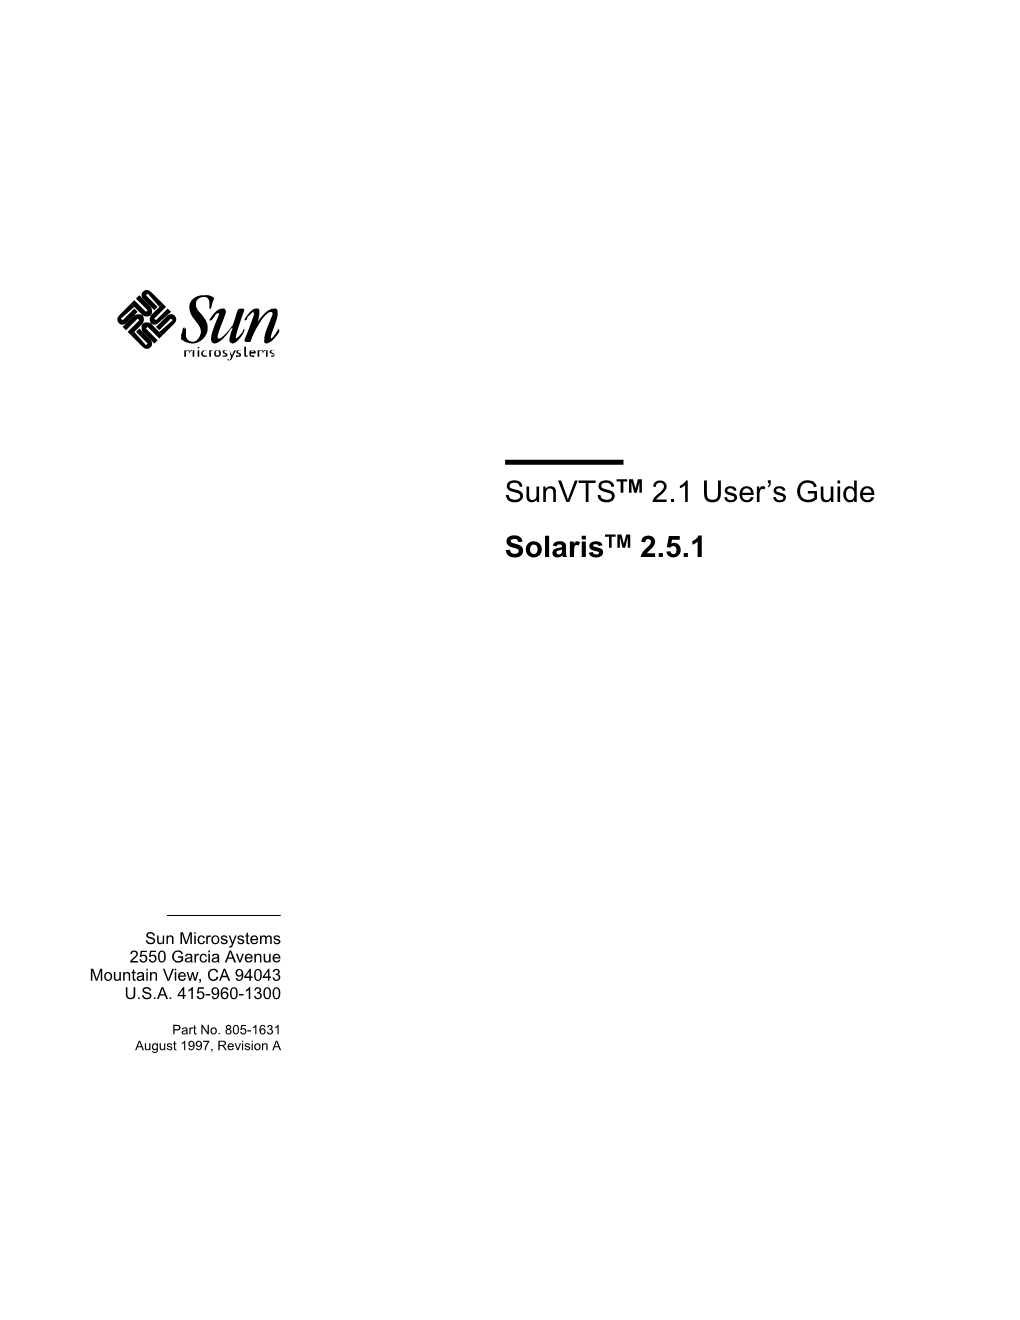 Sunvts 2.1 User's Guide